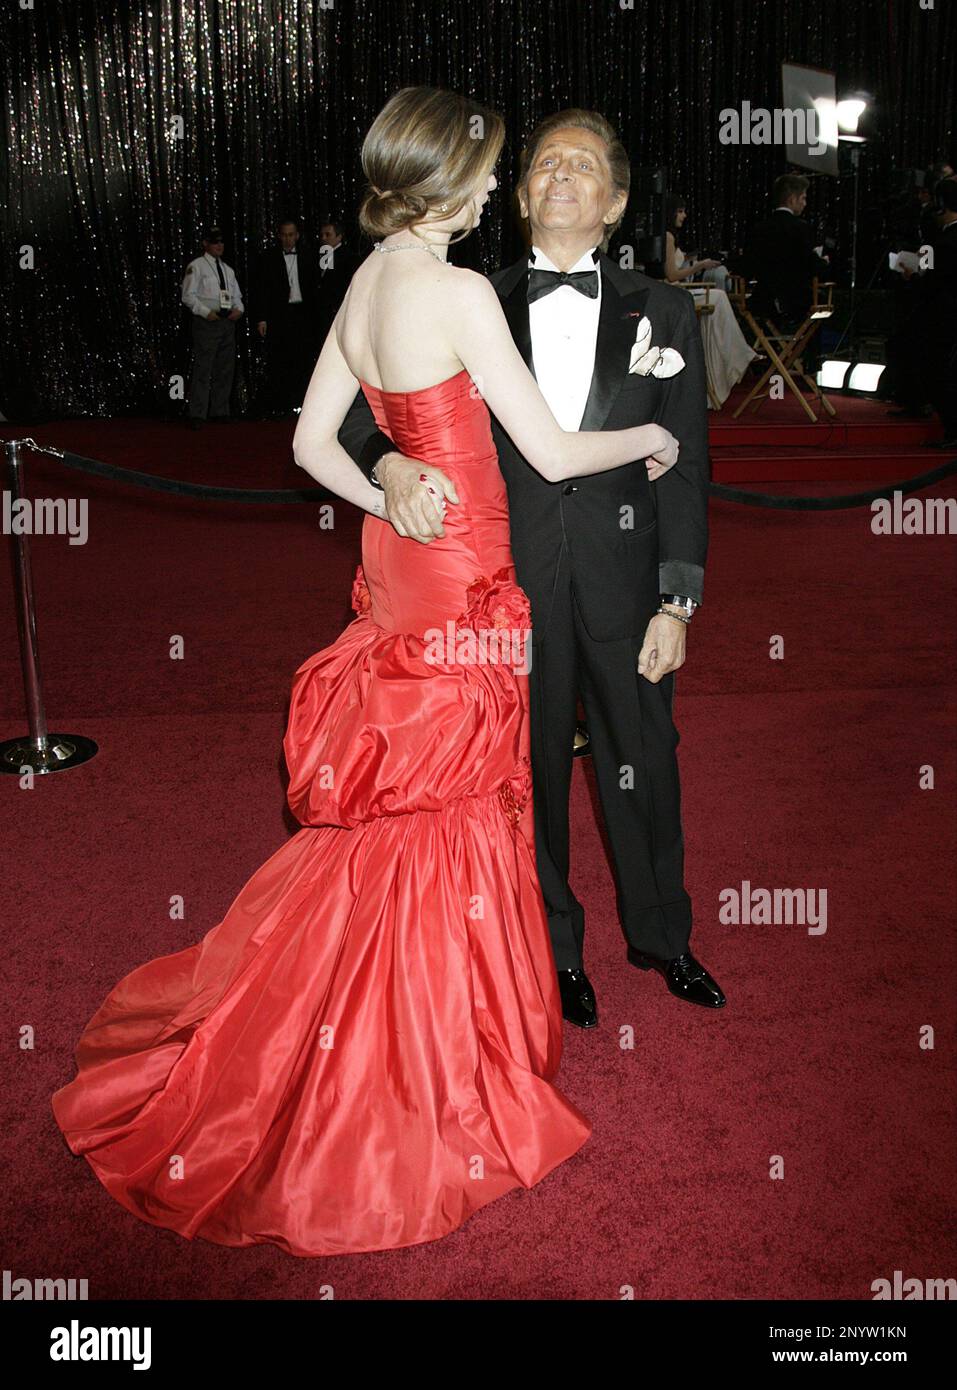 Actress Anne Hathaway and fashion designer Valentino arrive at the 83rd Annual Academy Awards held at the Kodak Theatre on February 27, 2011 in Hollywood, California.  Photo by Francis Specker Stock Photo